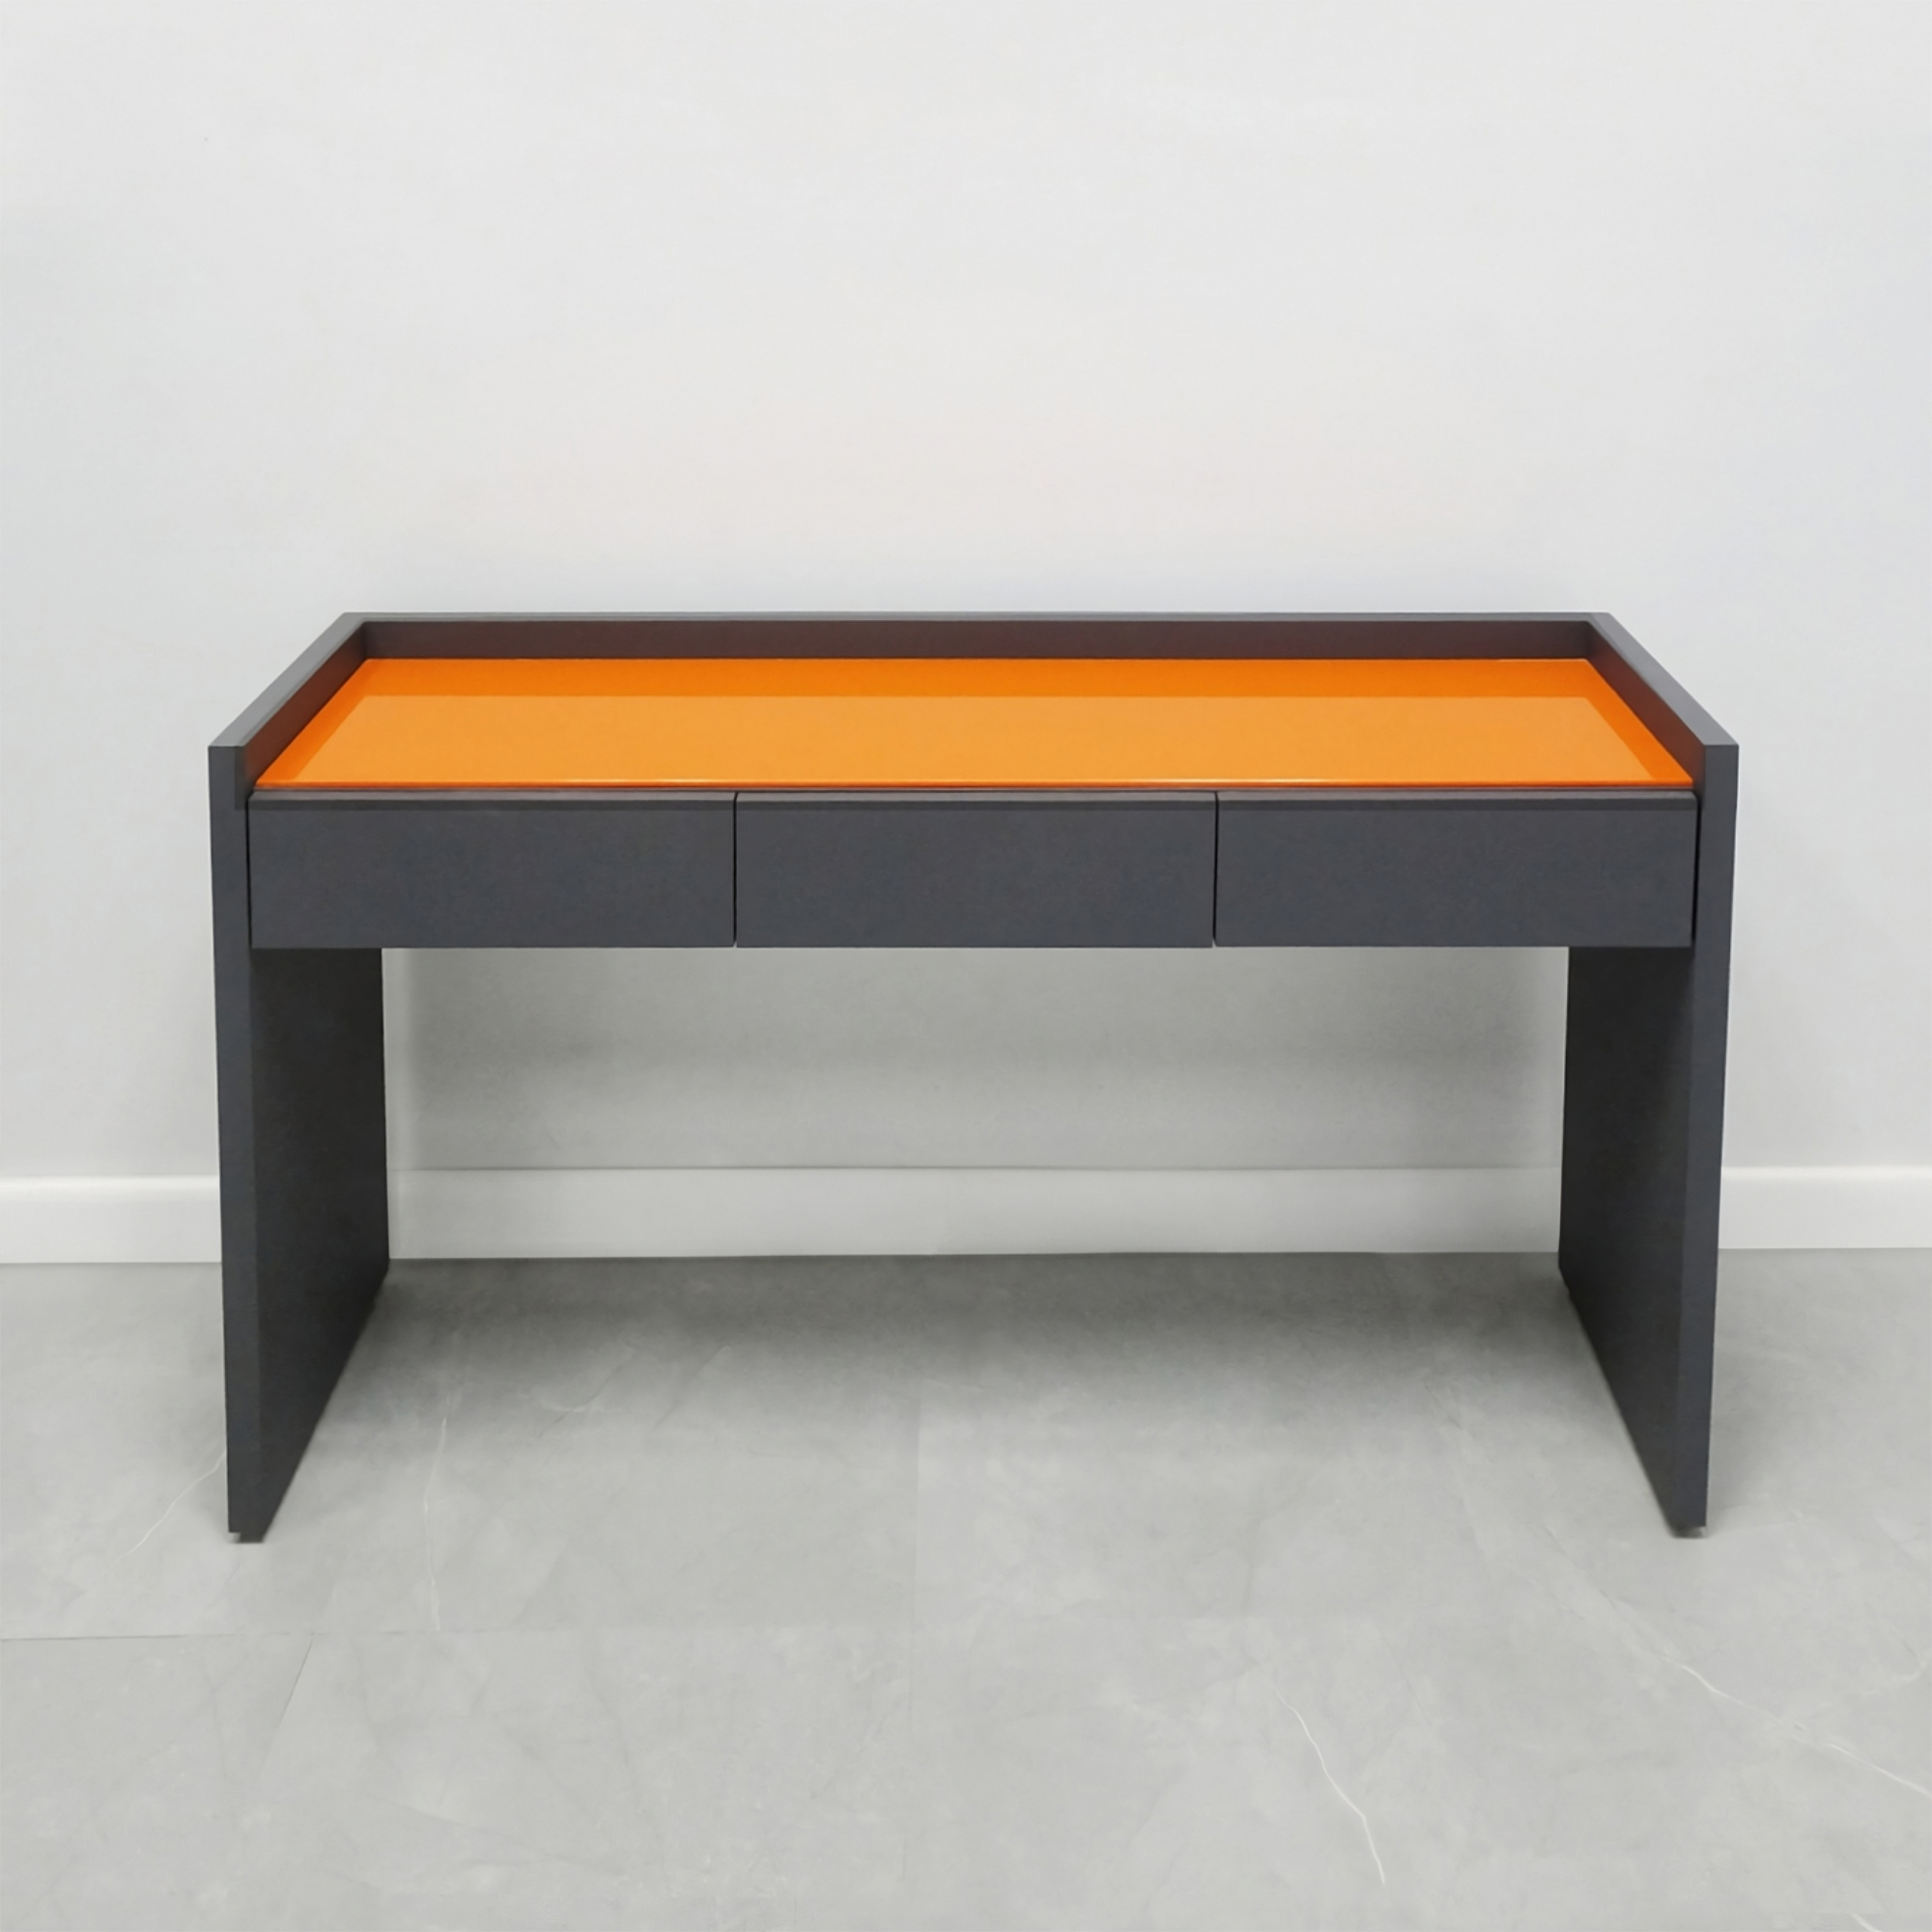 Avenue Console Table in orange tempered glass top and gray laminate console & front drawers shown here.